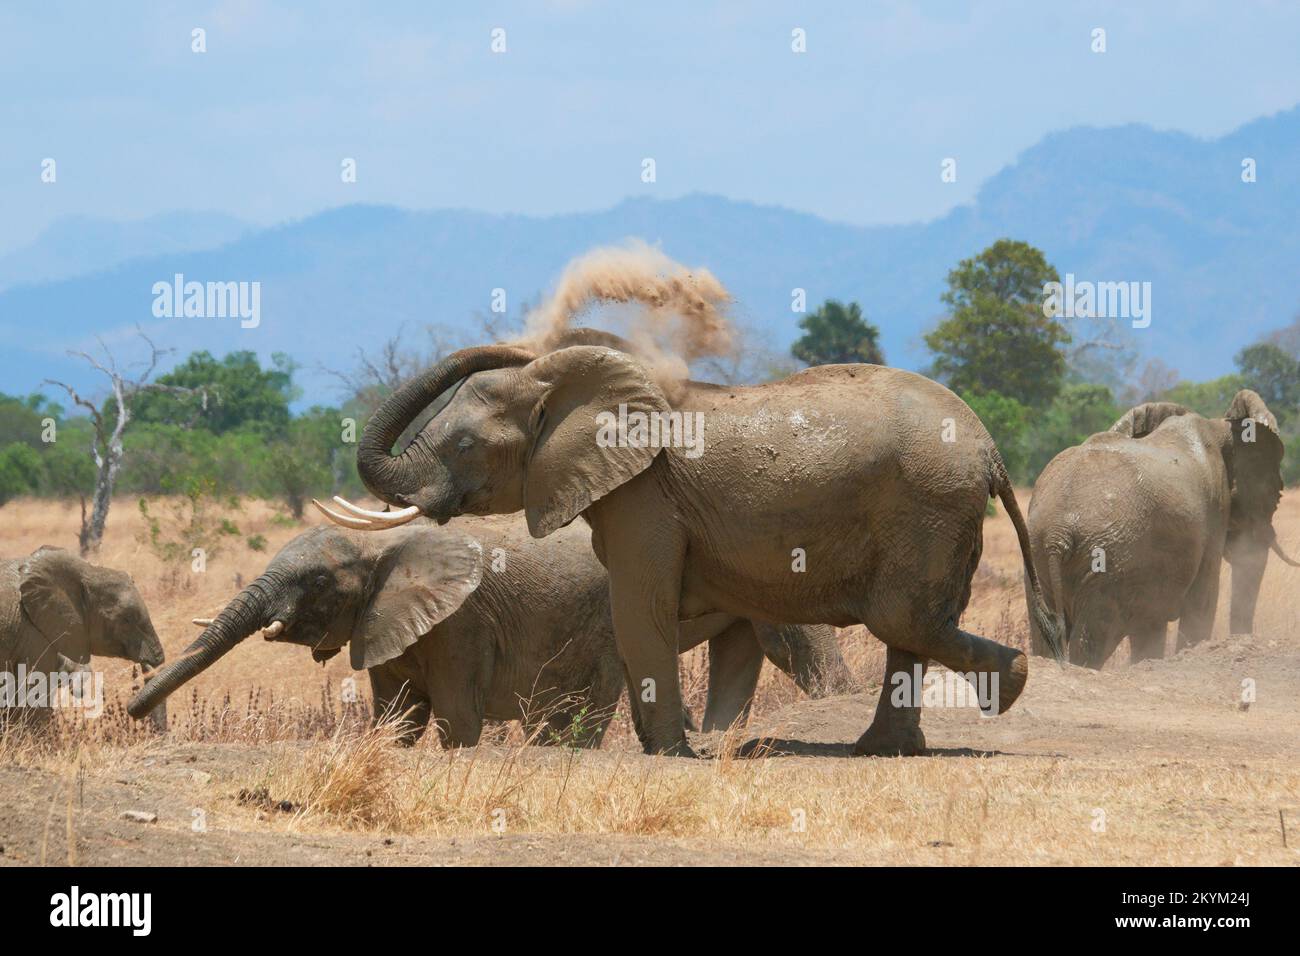 An African Bush Elephants covers themselves in dust after bathing in  a watering hole in the midday heat of  Mikumi National park in dry season Stock Photo